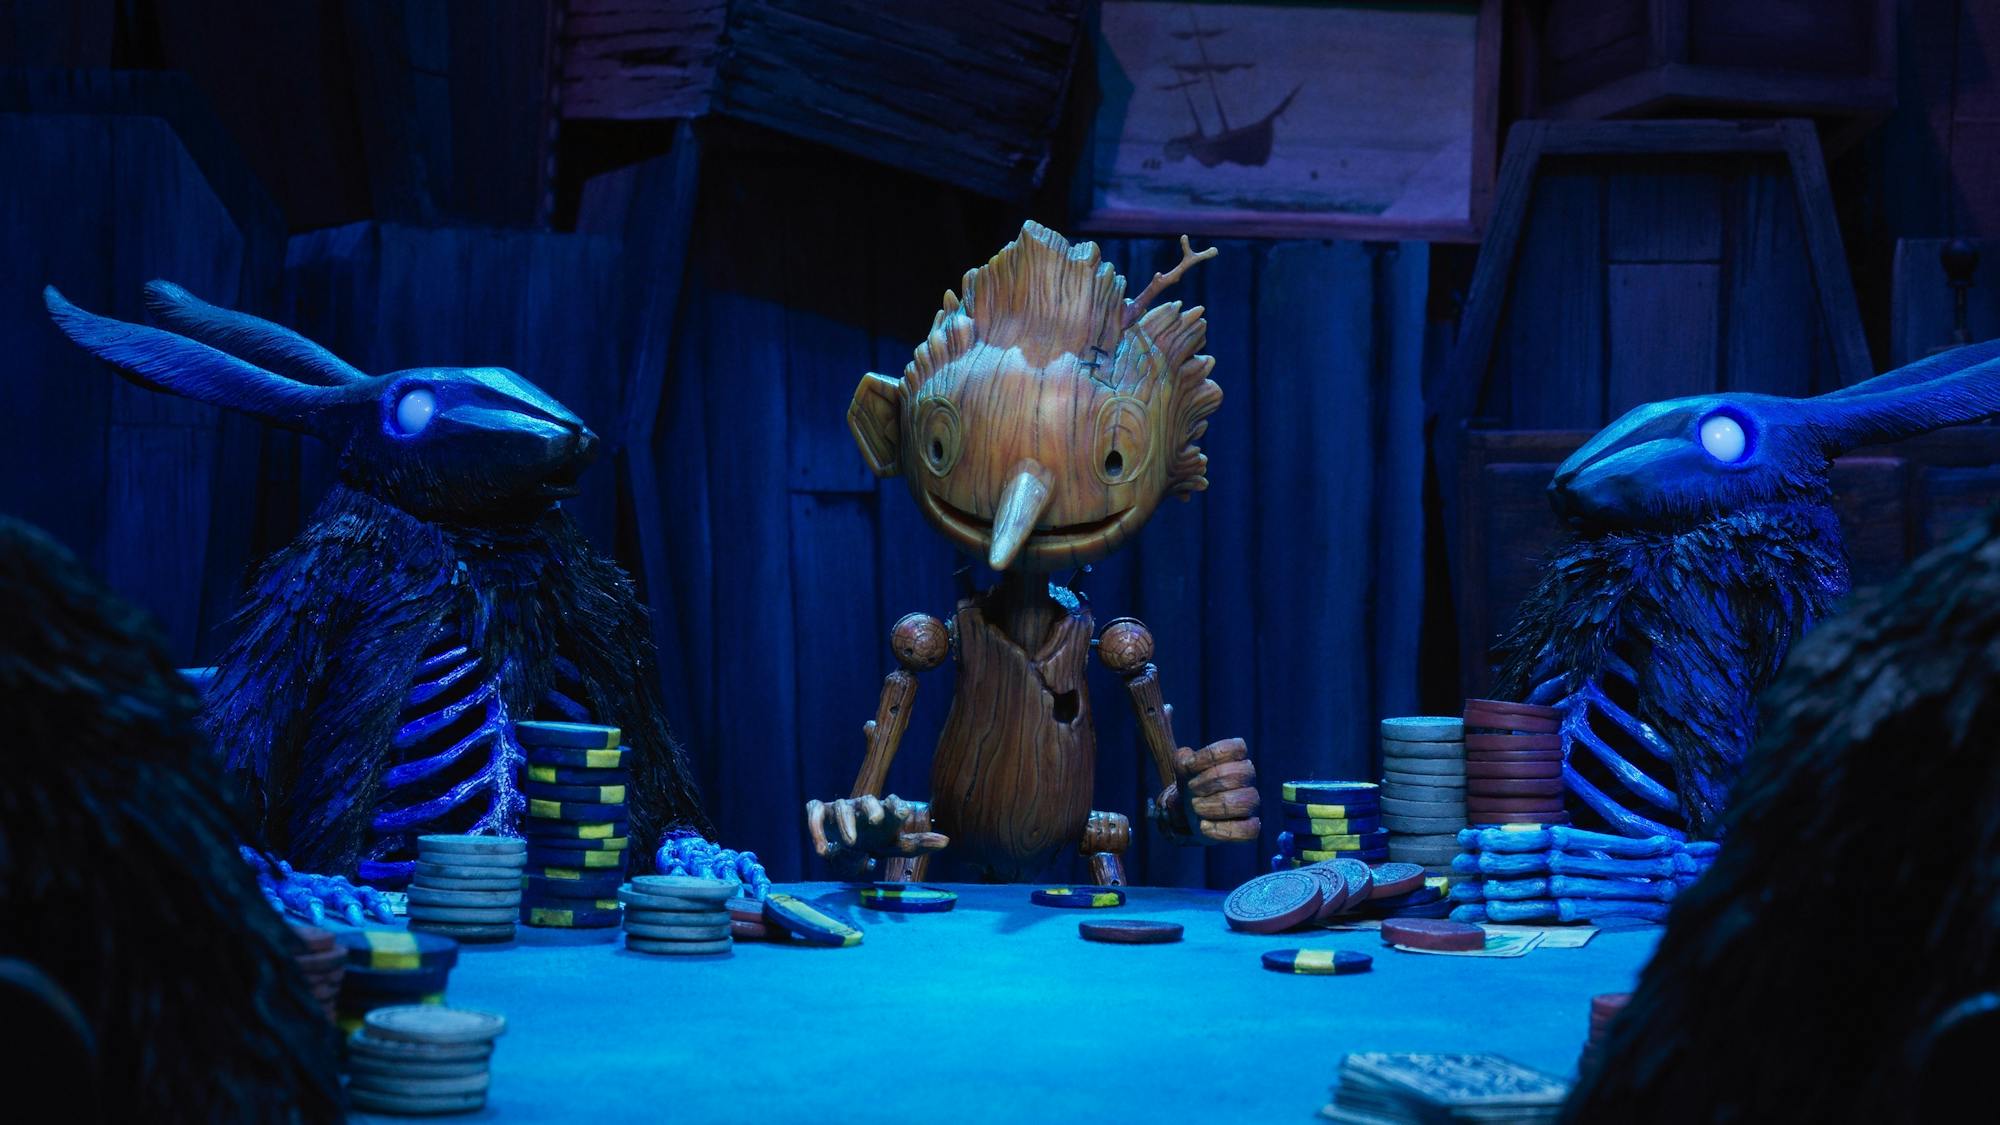 Pinocchio (Gregory Mann) plays poker with the Black Rabbits (Tim Blake Nelson) in this blue-lit scene.